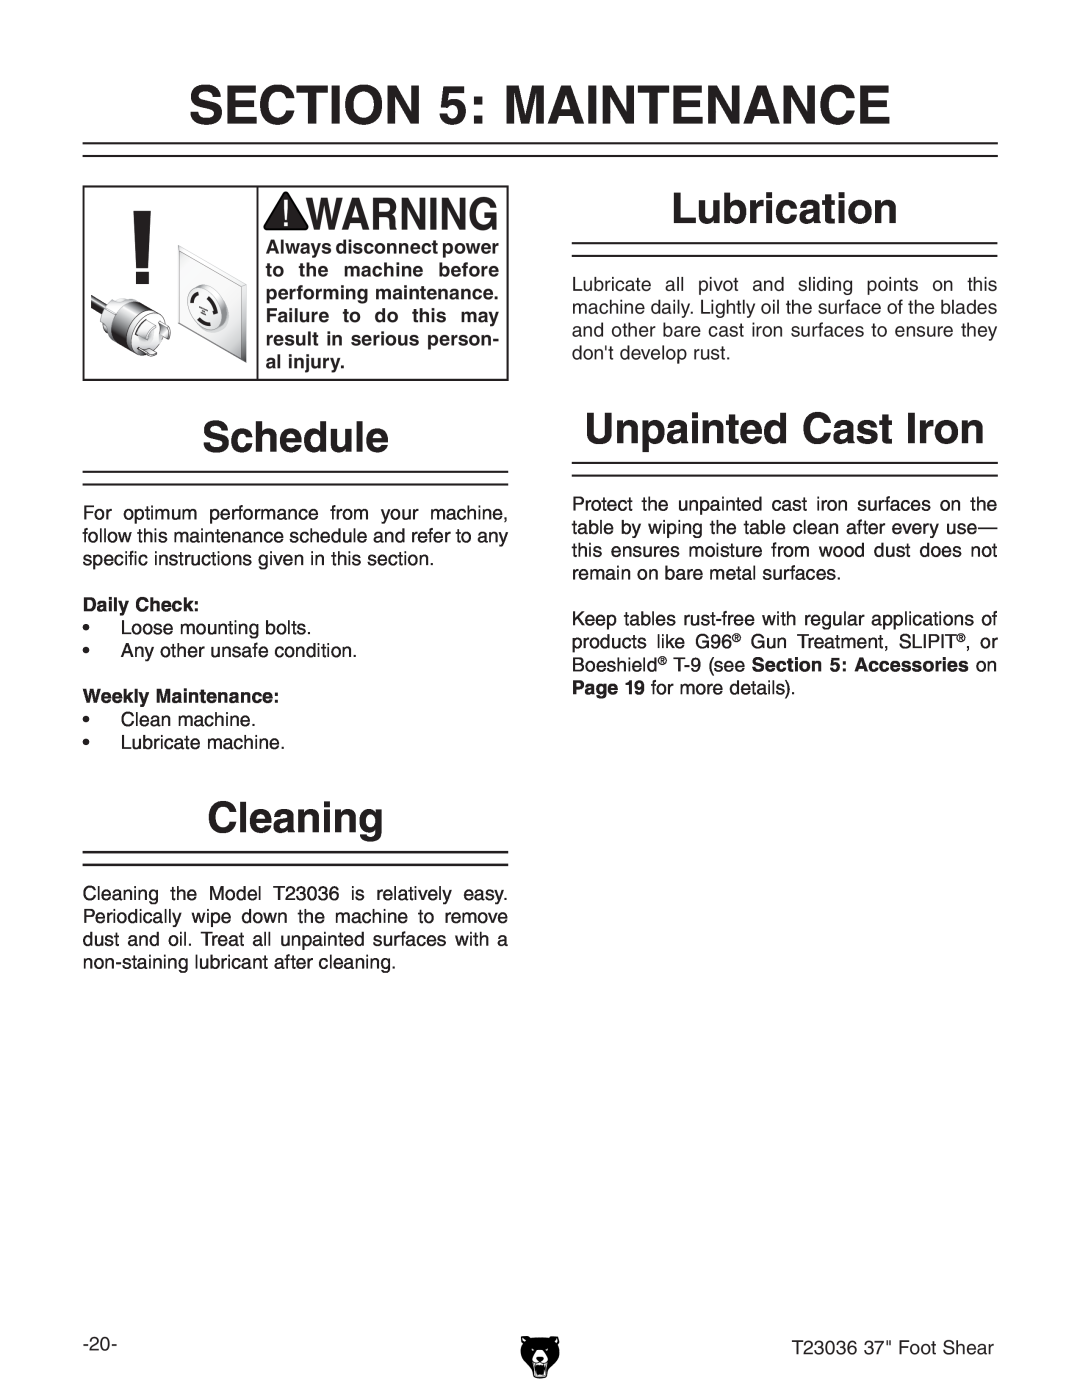 Grizzly T23036 owner manual Maintenance, Schedule, Cleaning, Lubrication, Unpainted Cast Iron 